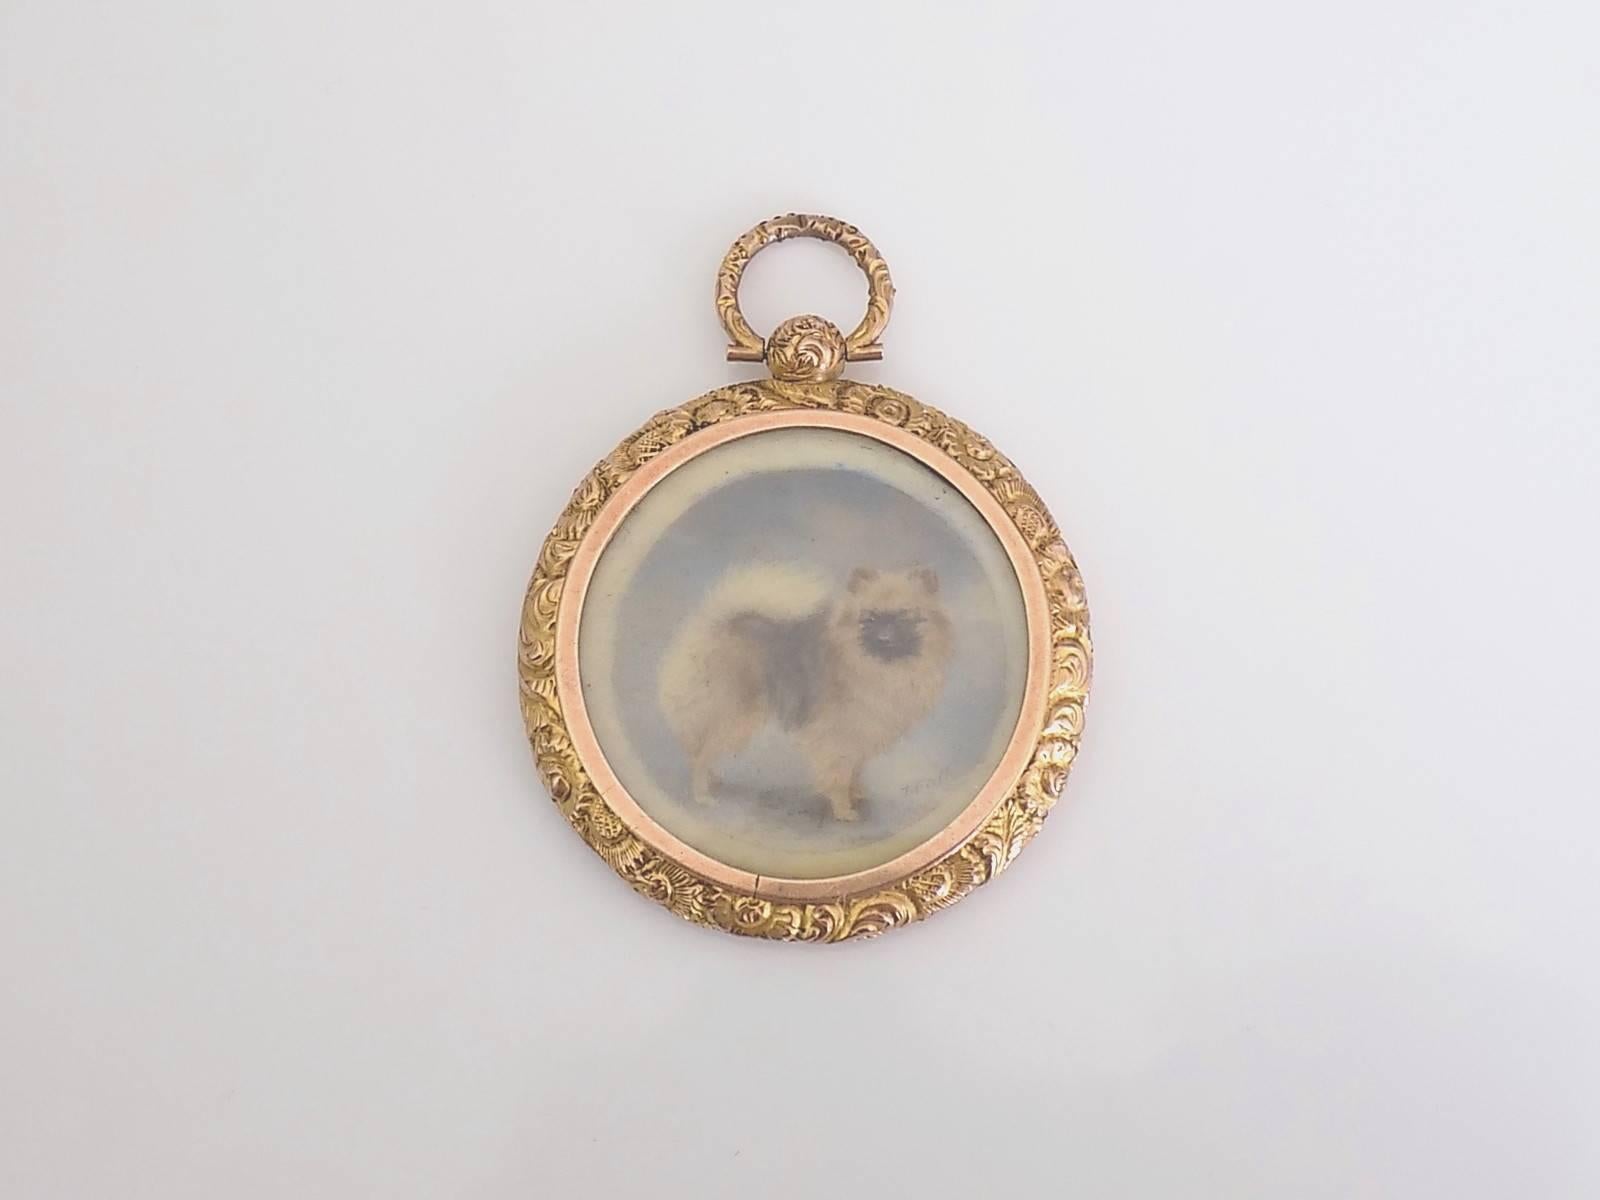 An Extremely rare a late Victorian hand painted miniature of Pomeranian dog in chased 9 Carat Gold glazed locket pendant. The miniature signed by T. Fall. English origin.
Total Drop of the locket 50mm, Width 37mm.
Marked 9CT for 9 carat gold.
The